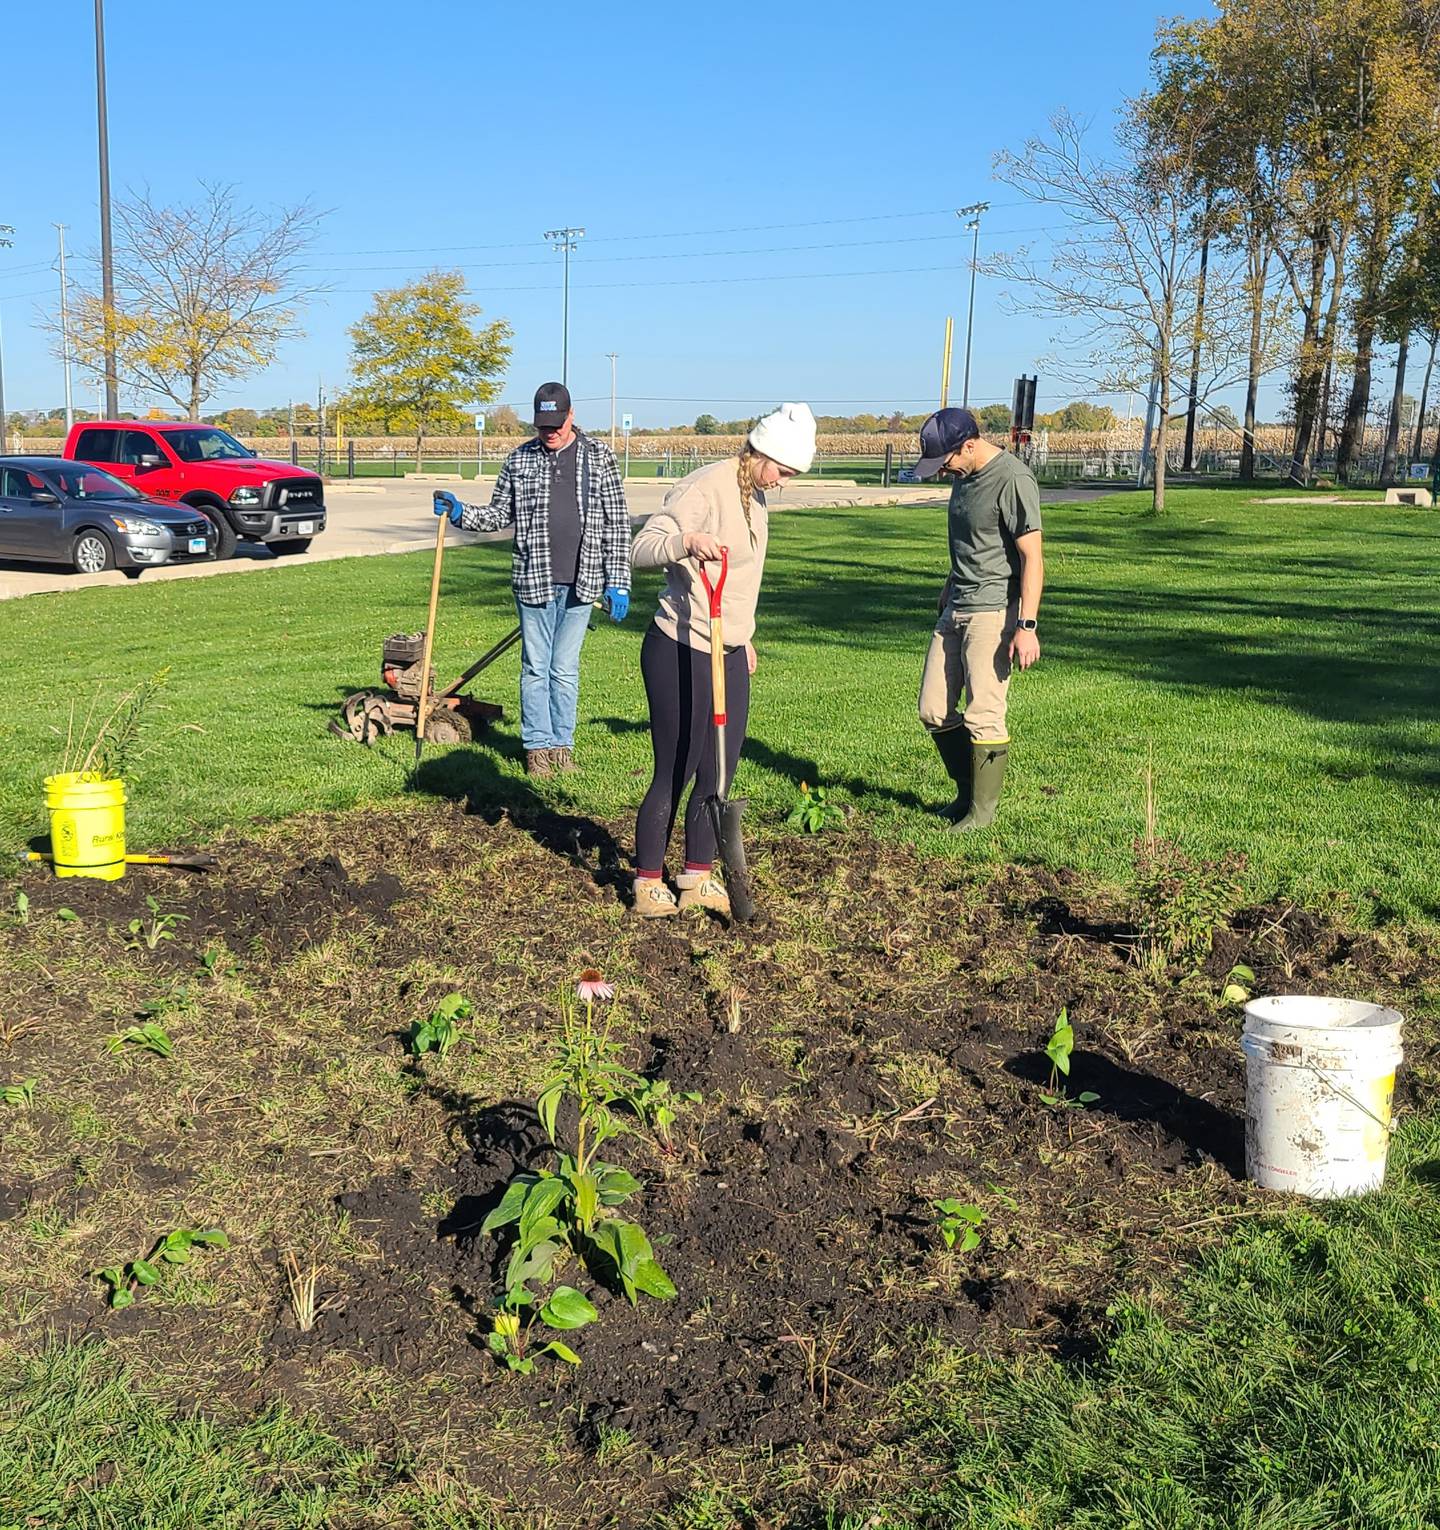 Rotarians and family members from La Salle, Peru and Illinois Valley Sunrise began construction of the pollinator demonstration plot near the park entrance on the east side of Rotary Park in La Salle.